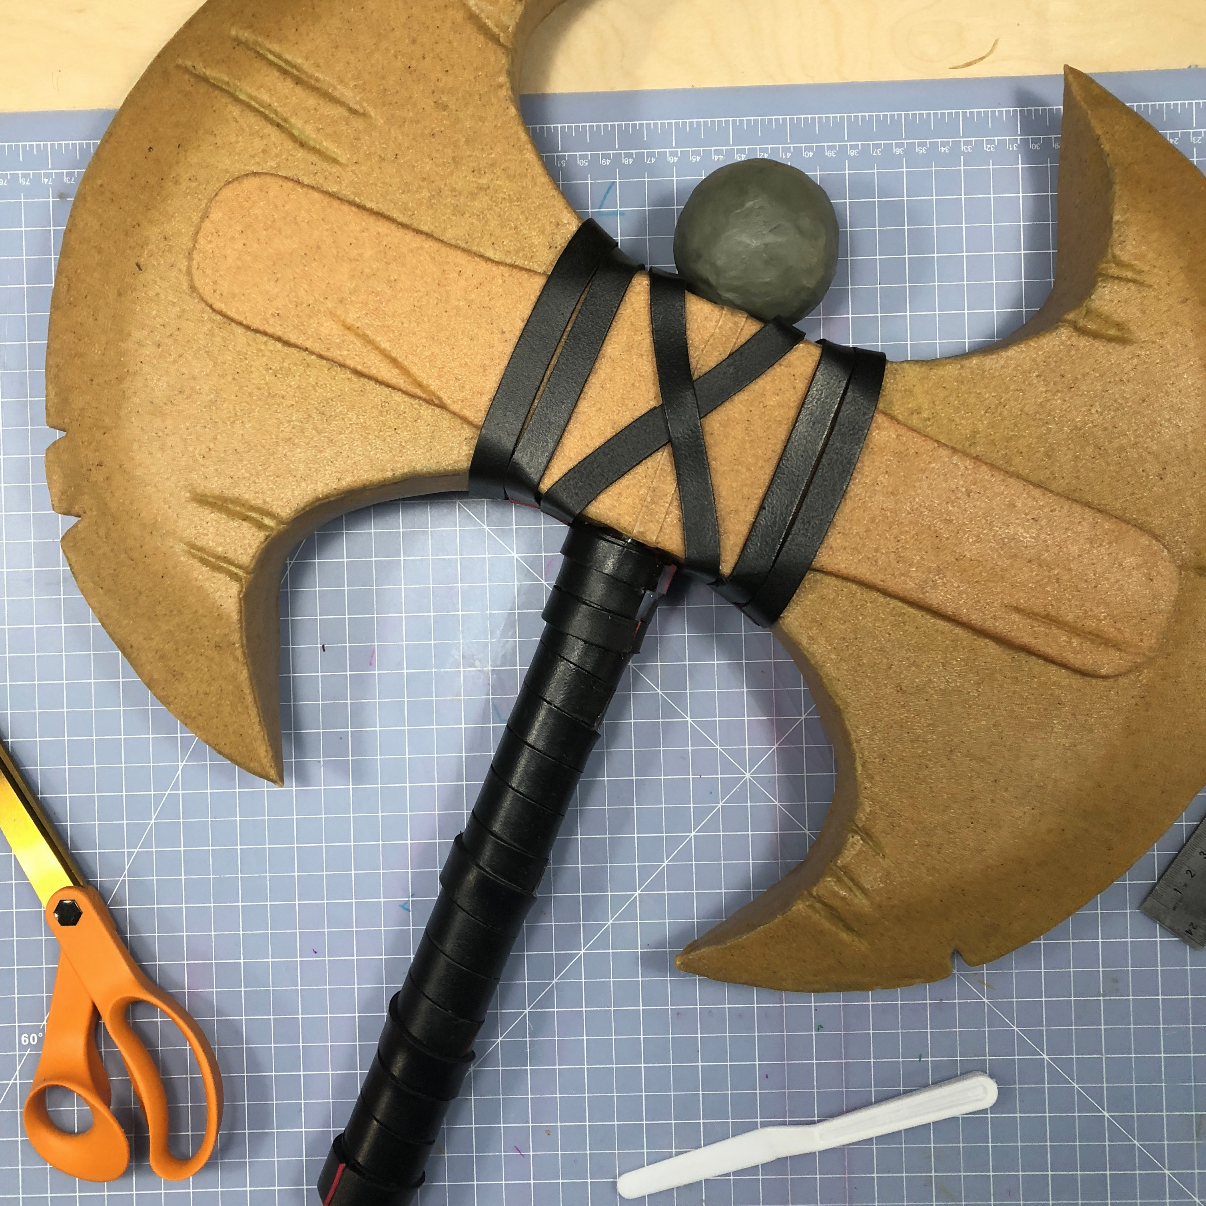 Finished cosplay axe covered in tan Worbla thermoplastic with strap details